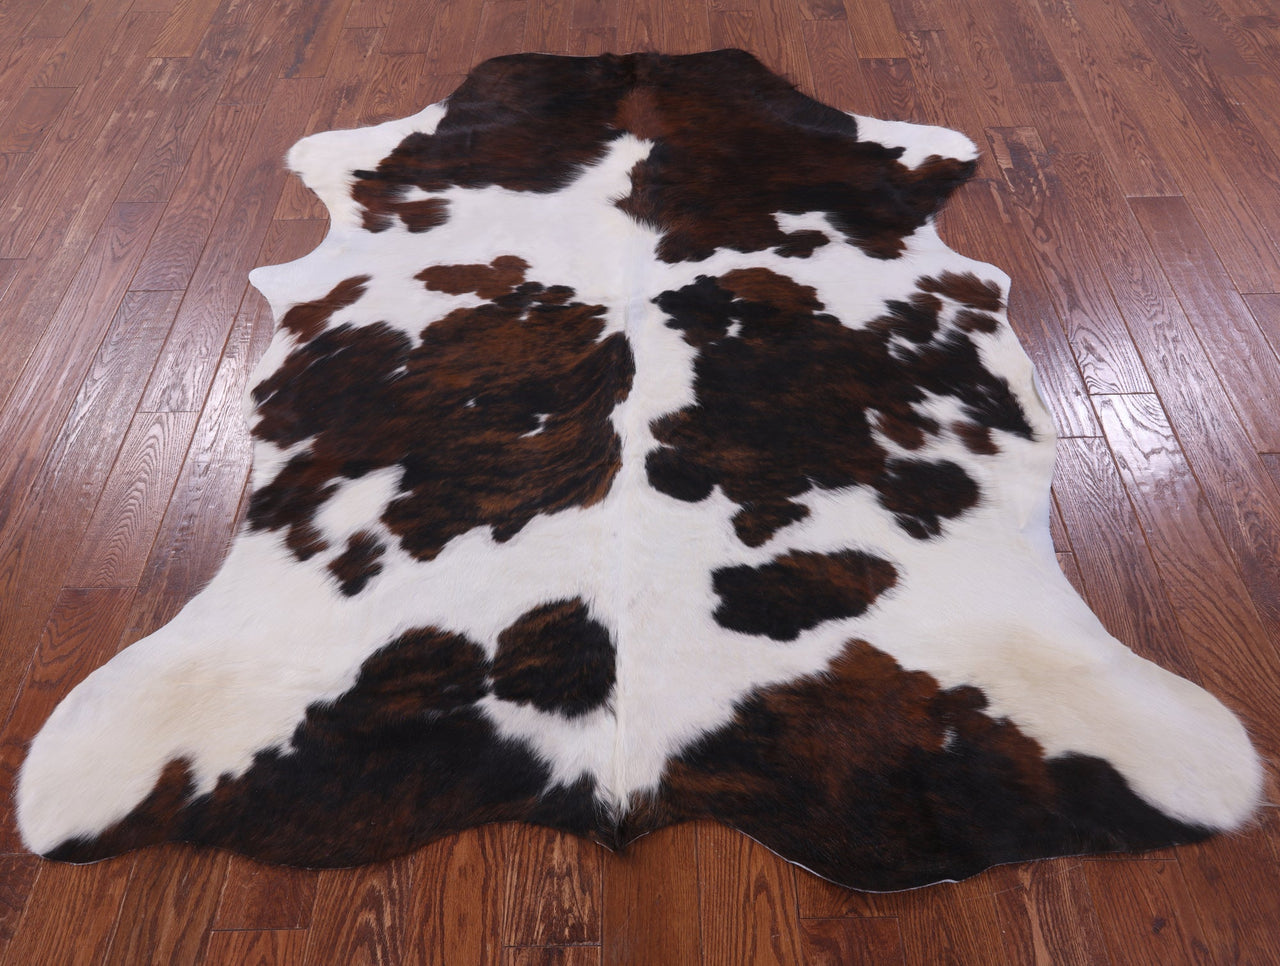 Tricolor Natural Cowhide Rug - Large 7'1"H x 5'9"W